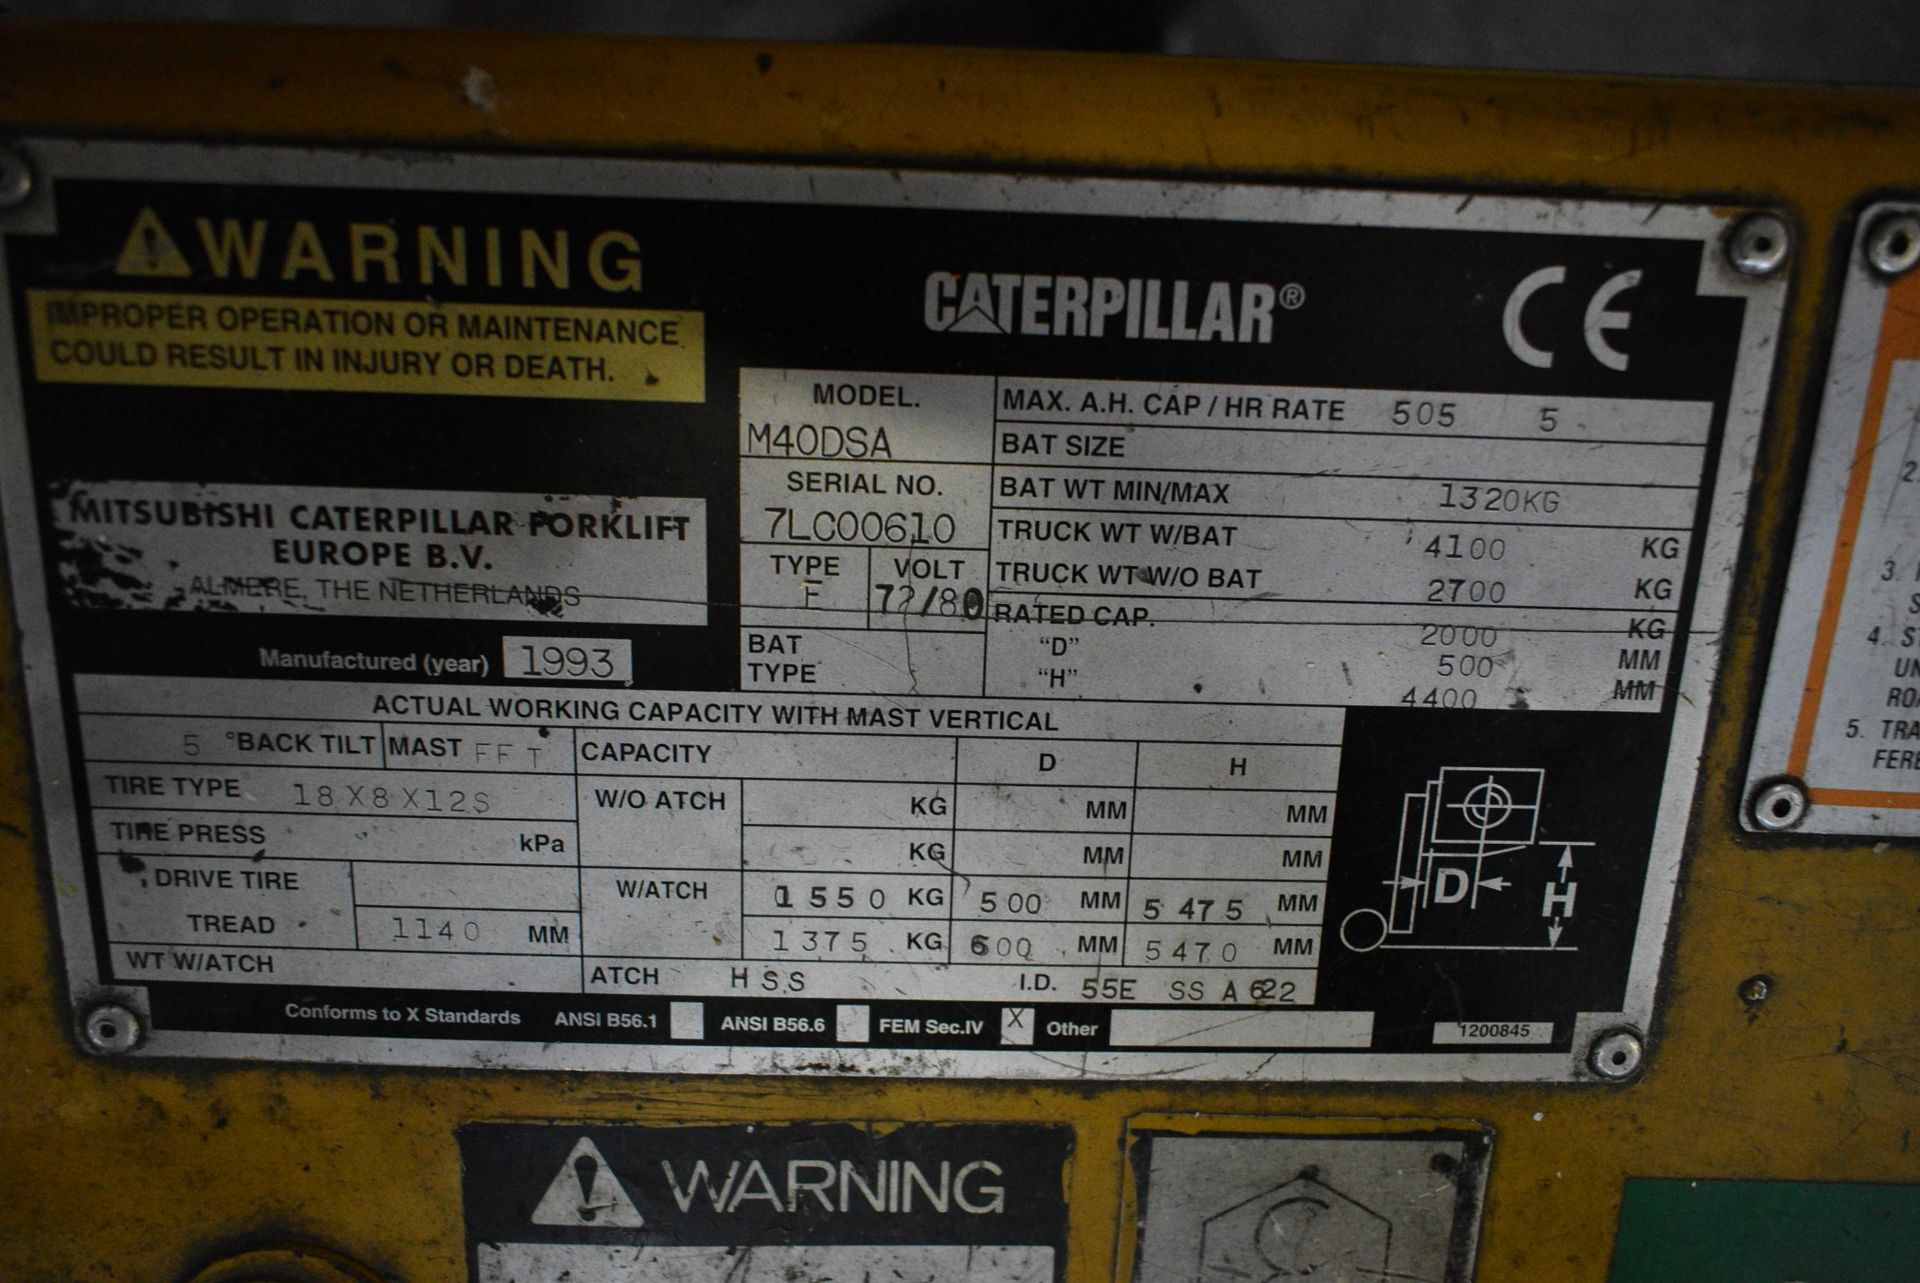 Caterpillar M40DSA BATTERY ELECTRIC FORK LIFT TRUCK, serial no. 7LC00610, 2000kg rated capacity, - Image 8 of 12